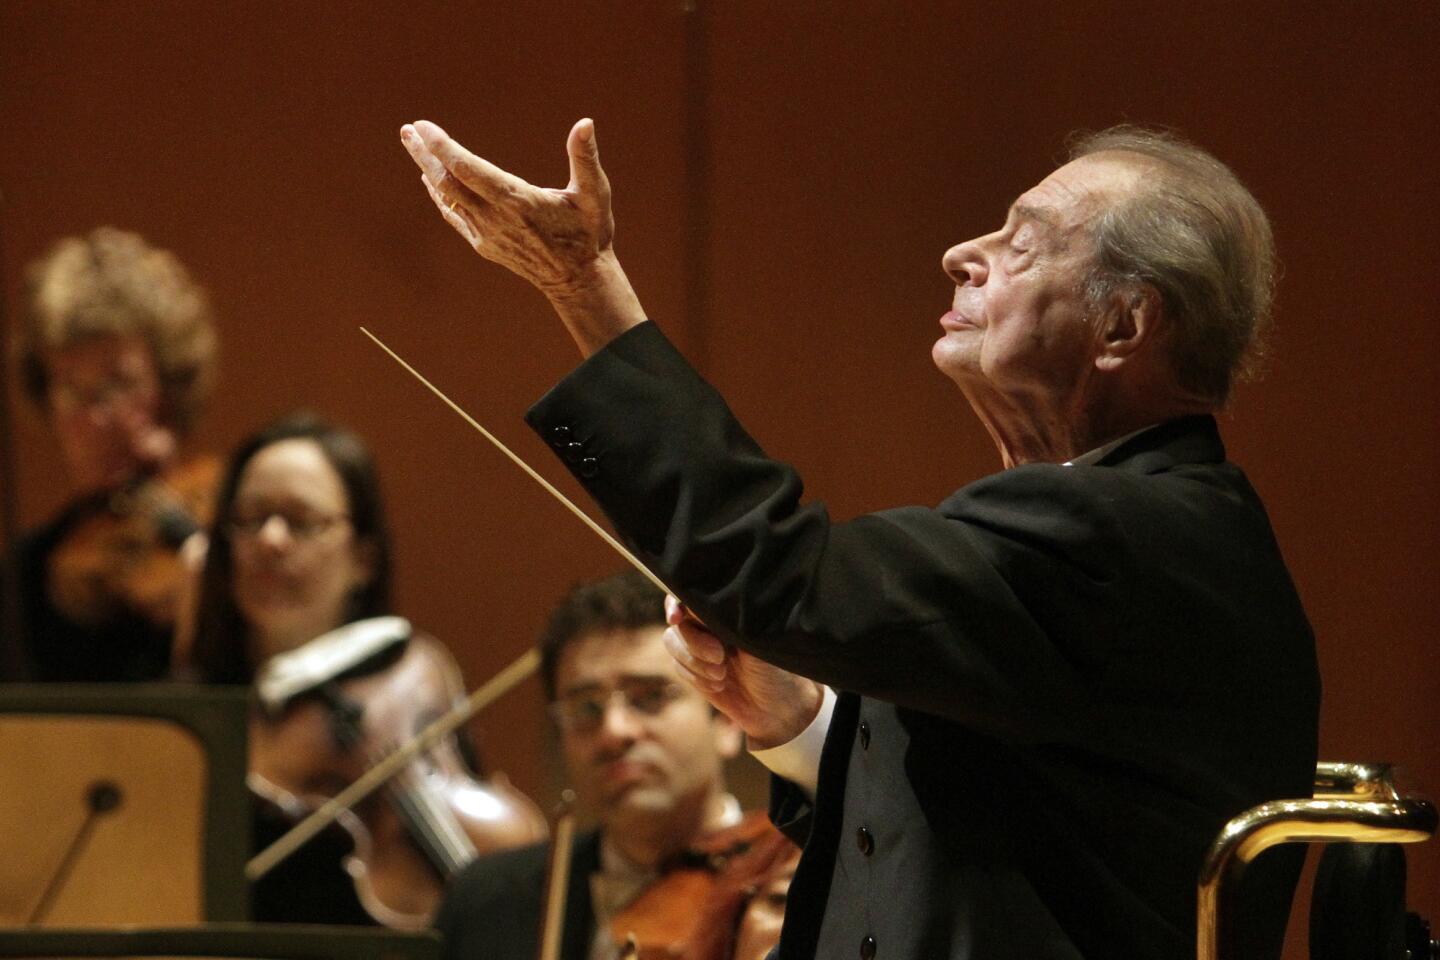 Arts and culture in pictures by The Times | Rafael Fruhbeck de Burgos conducts L.A. Phil